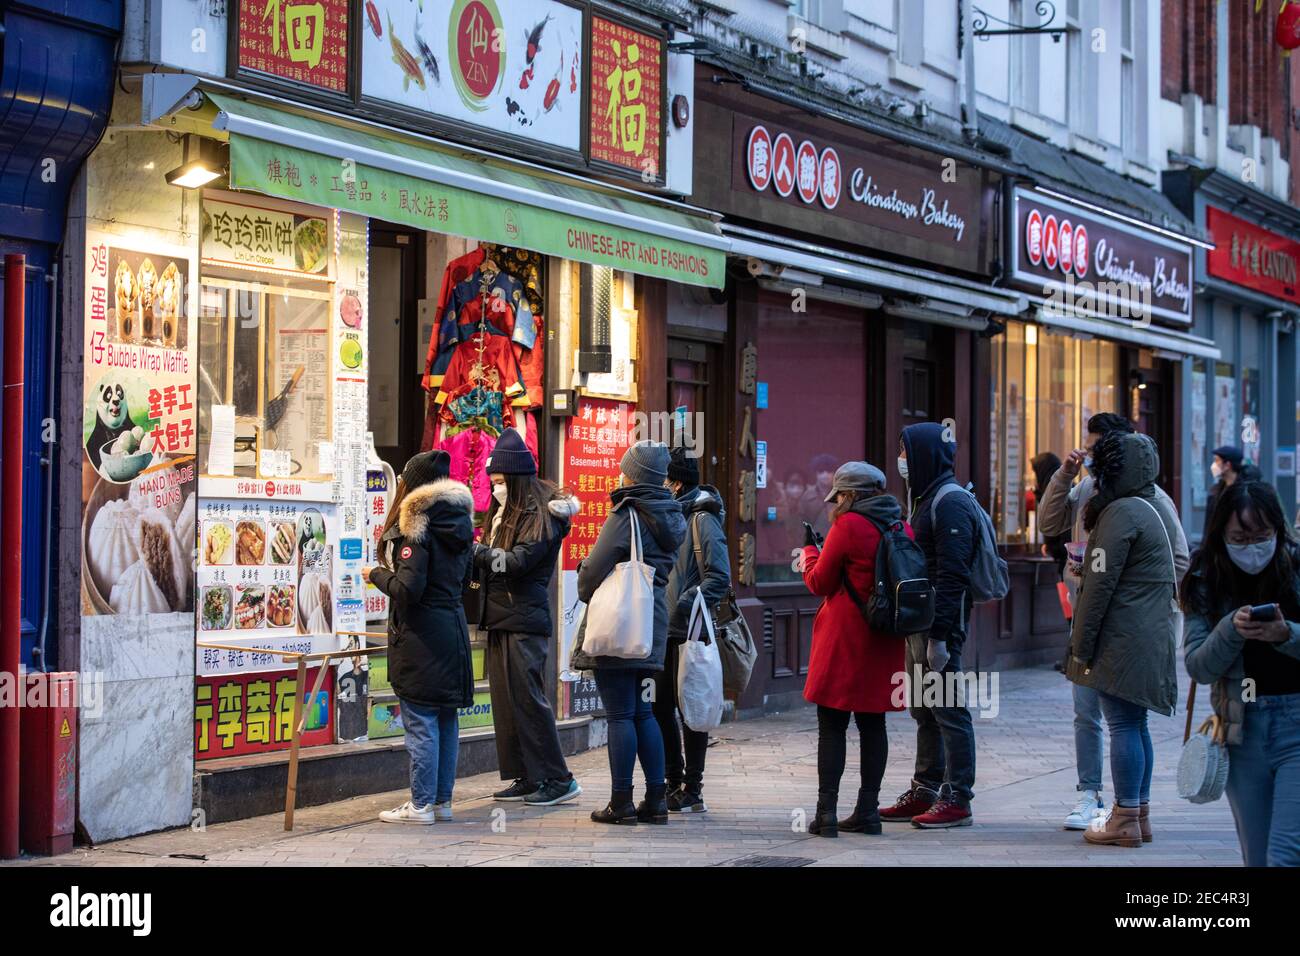 London's China Town on the first evening of the New Lunar Year, The Year of the Ox, during the Coronavirus Lockdown prohibiting the annual celebration Stock Photo